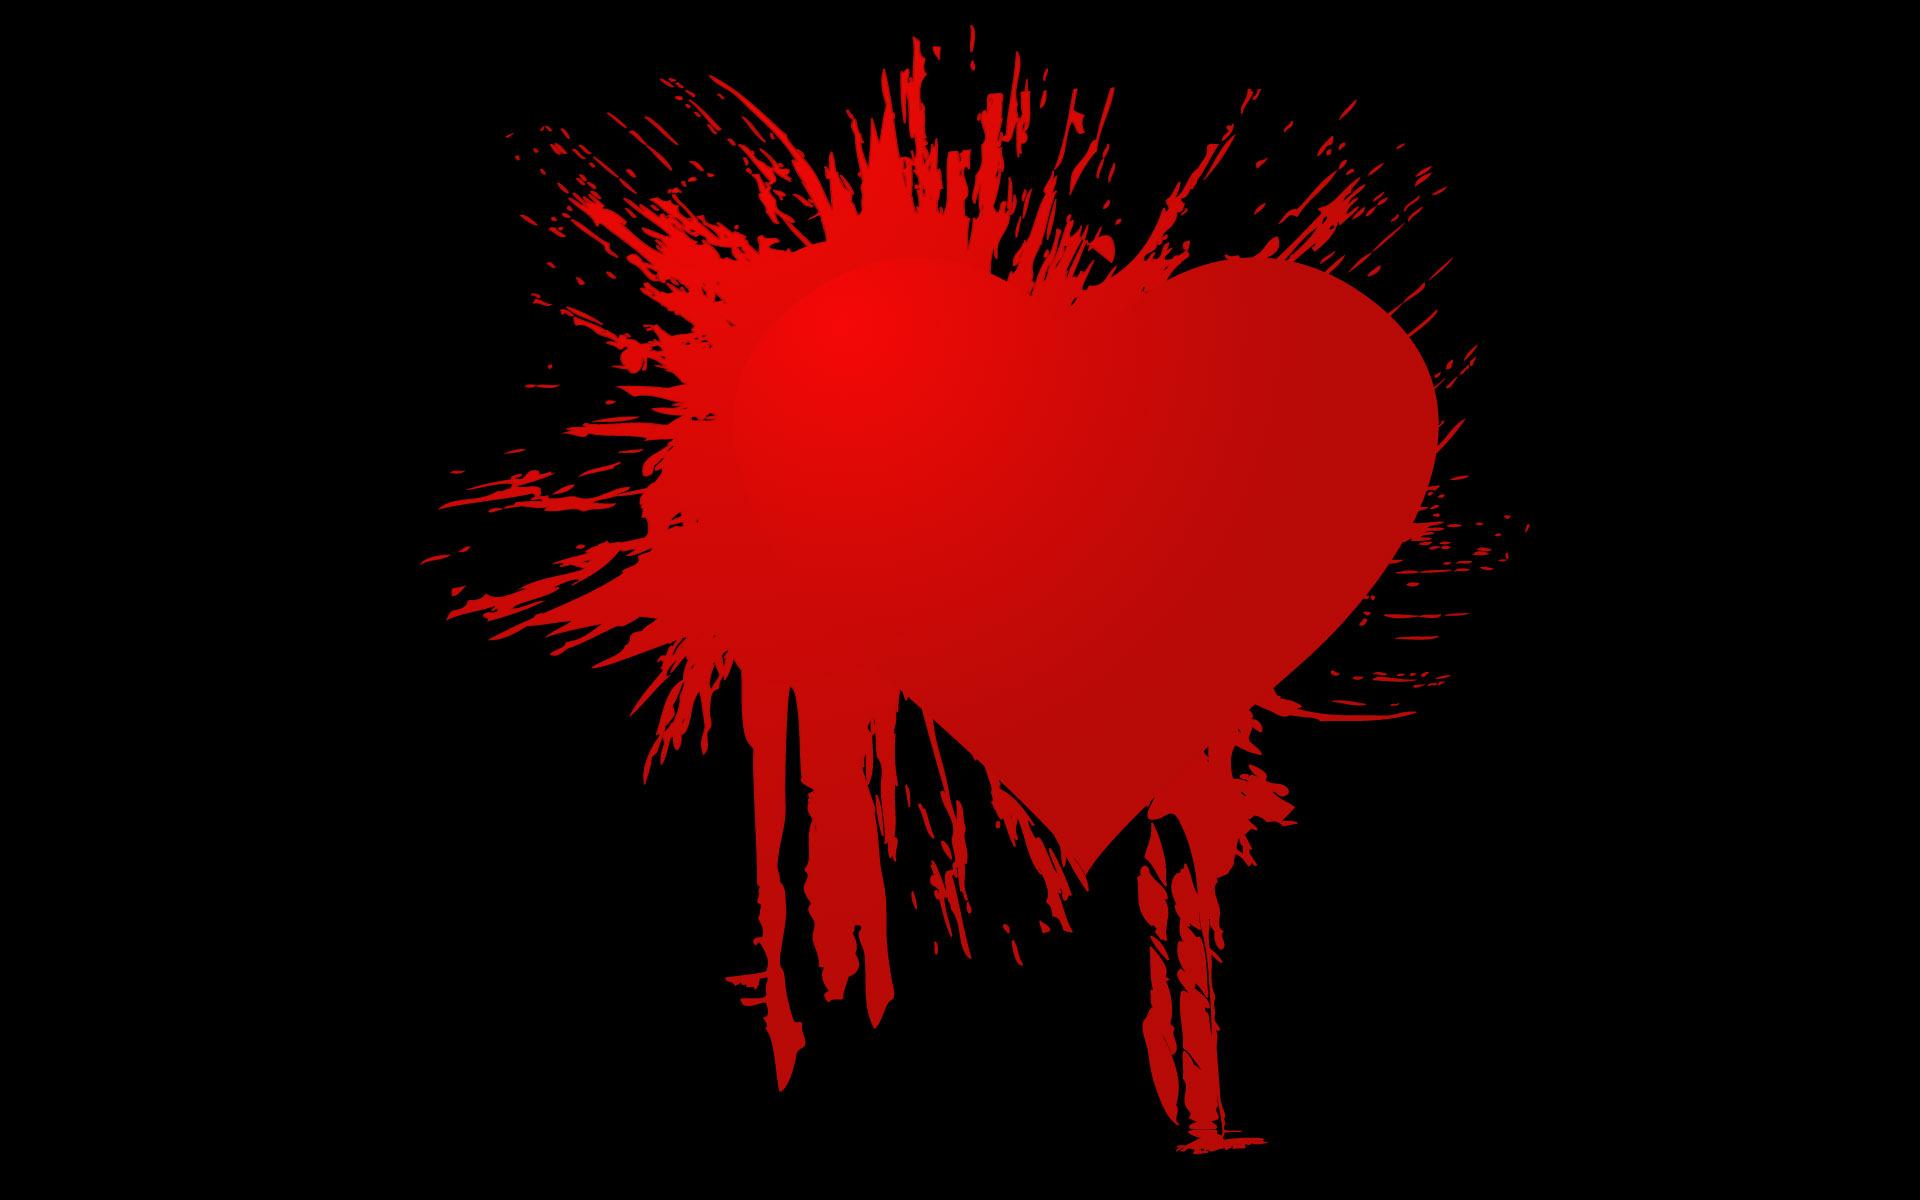 Broken Heart wallpaper and image, picture